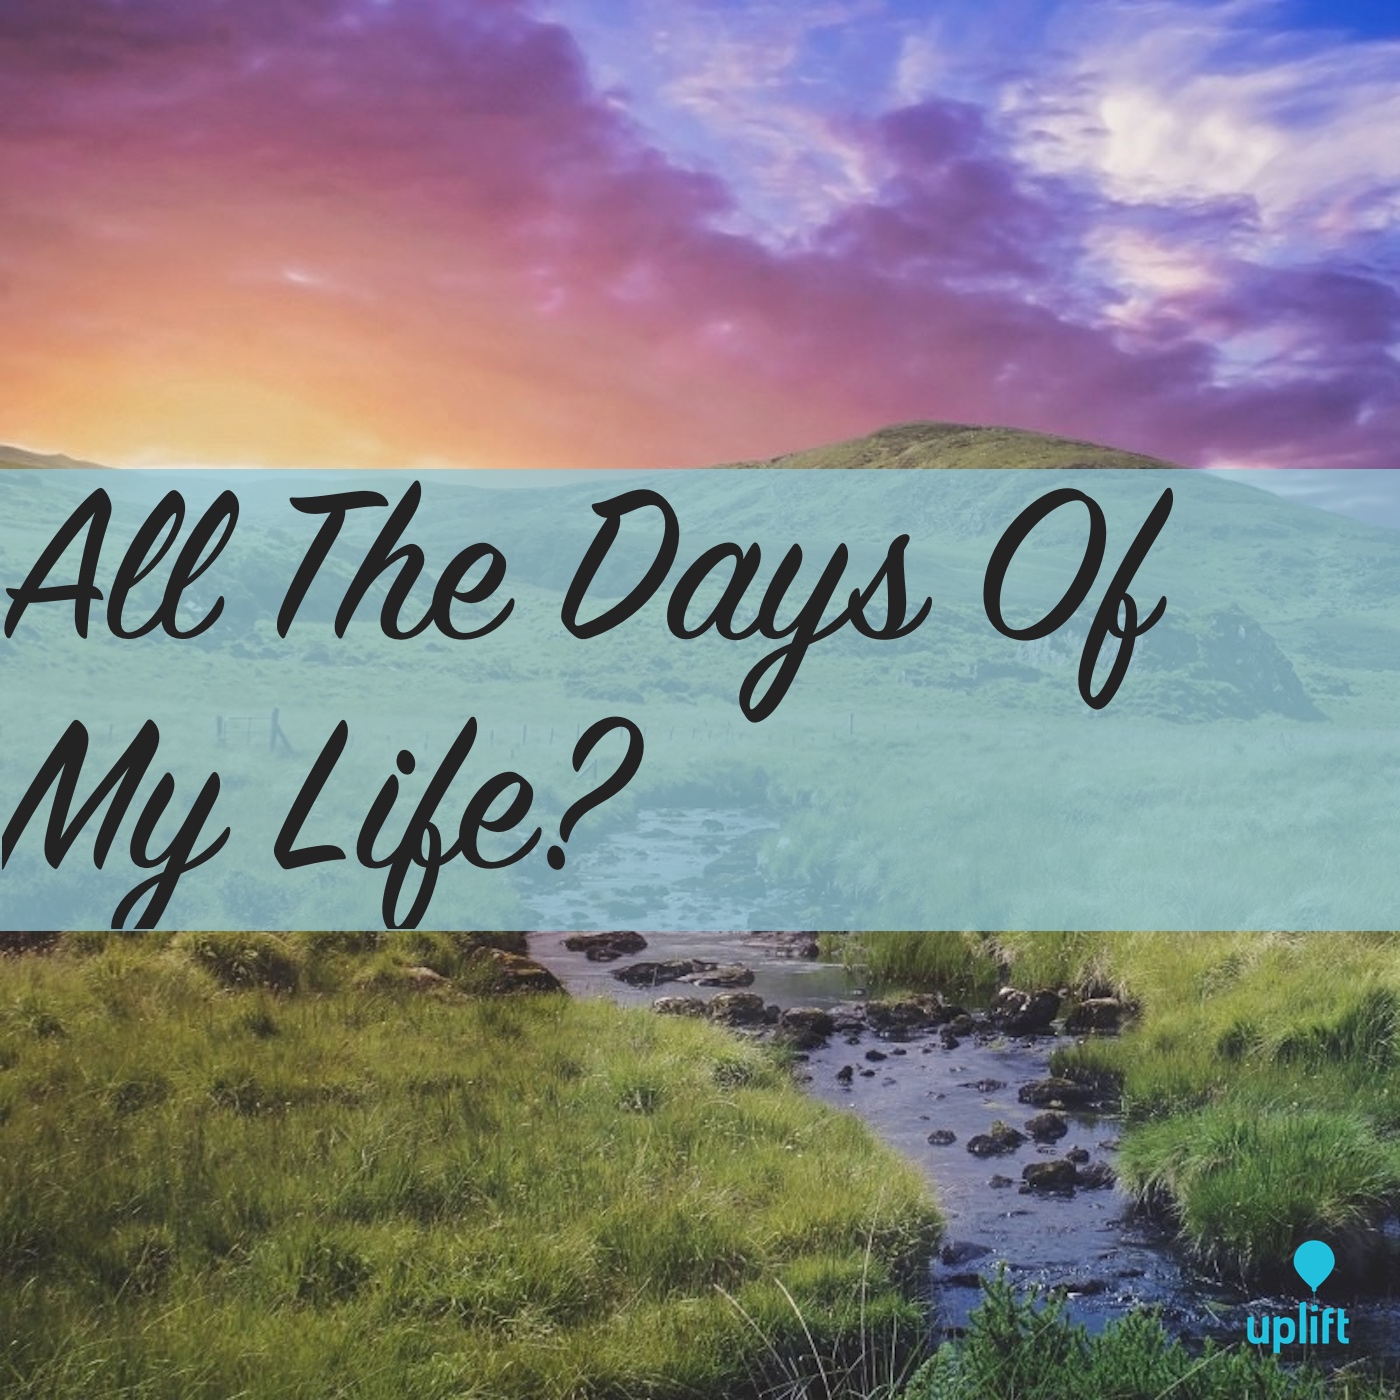 Episode 25: All The Days Of My Life?